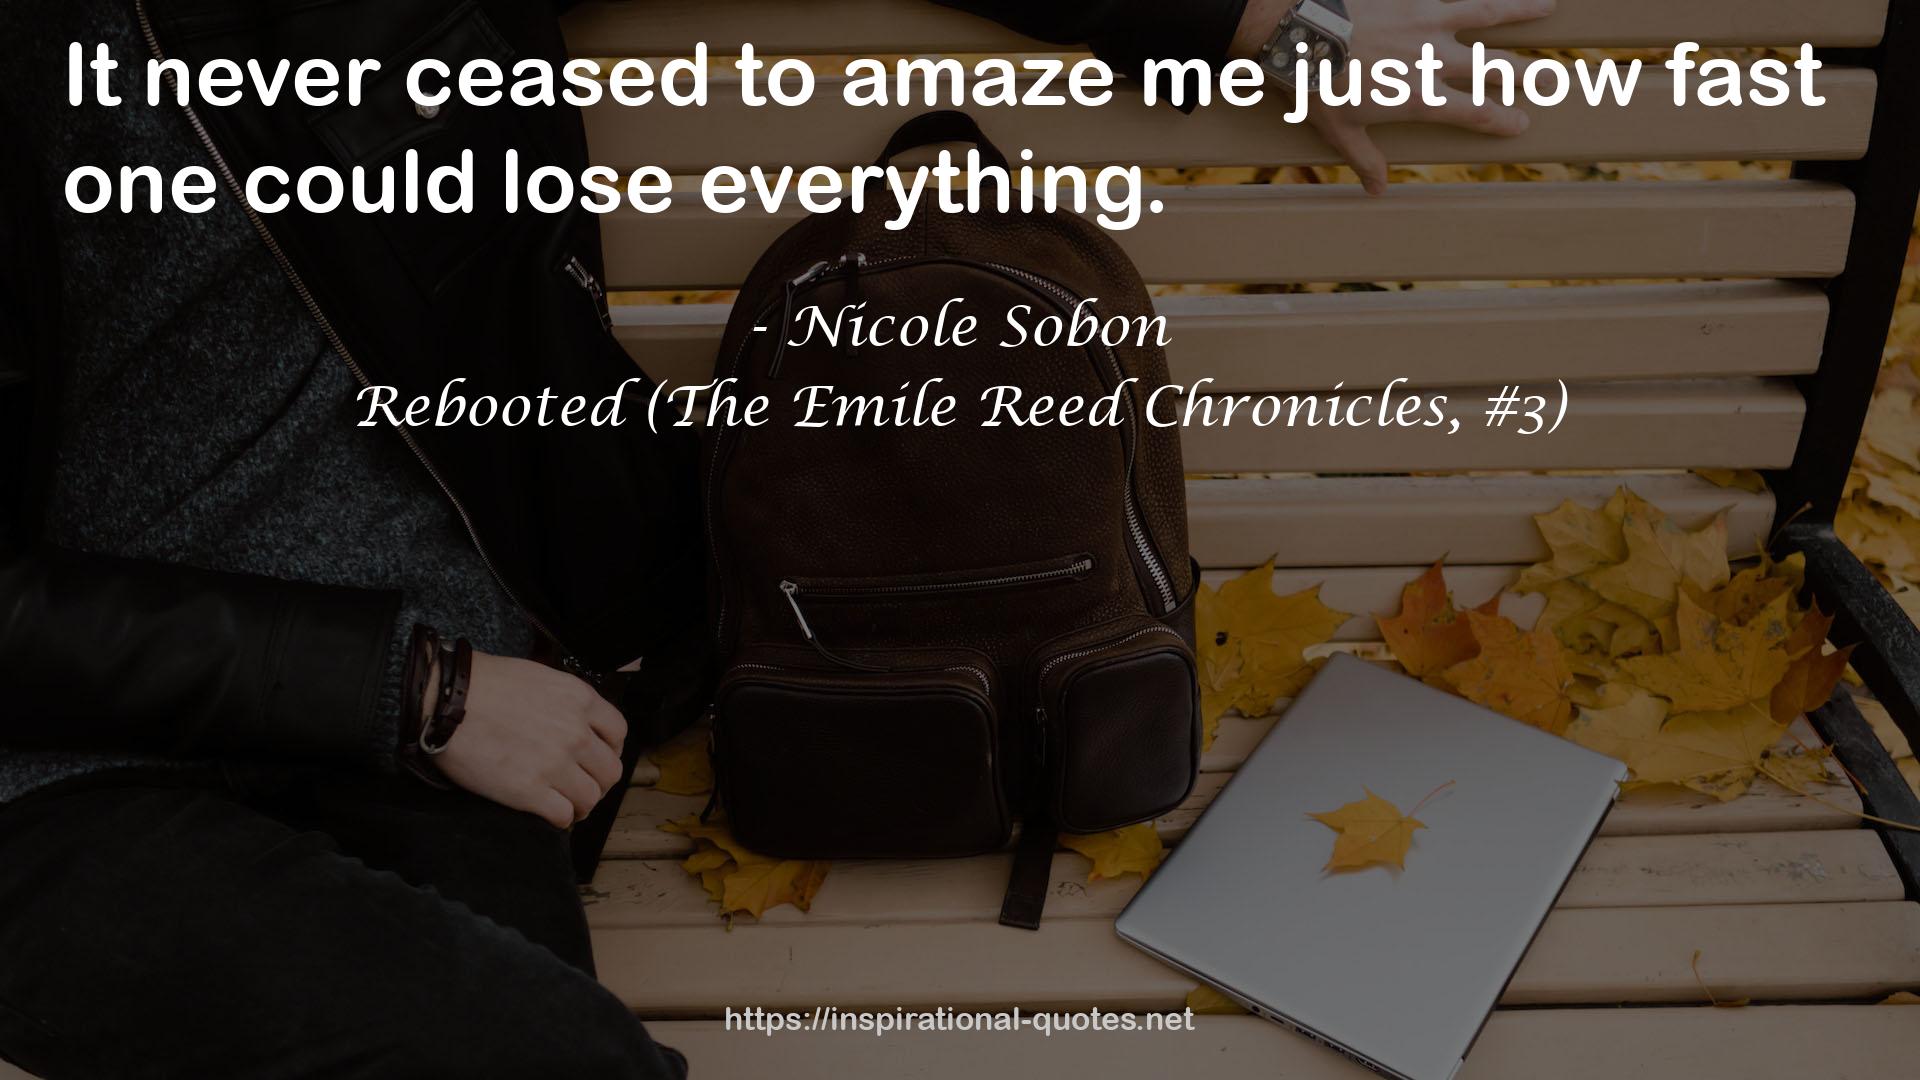 Rebooted (The Emile Reed Chronicles, #3) QUOTES